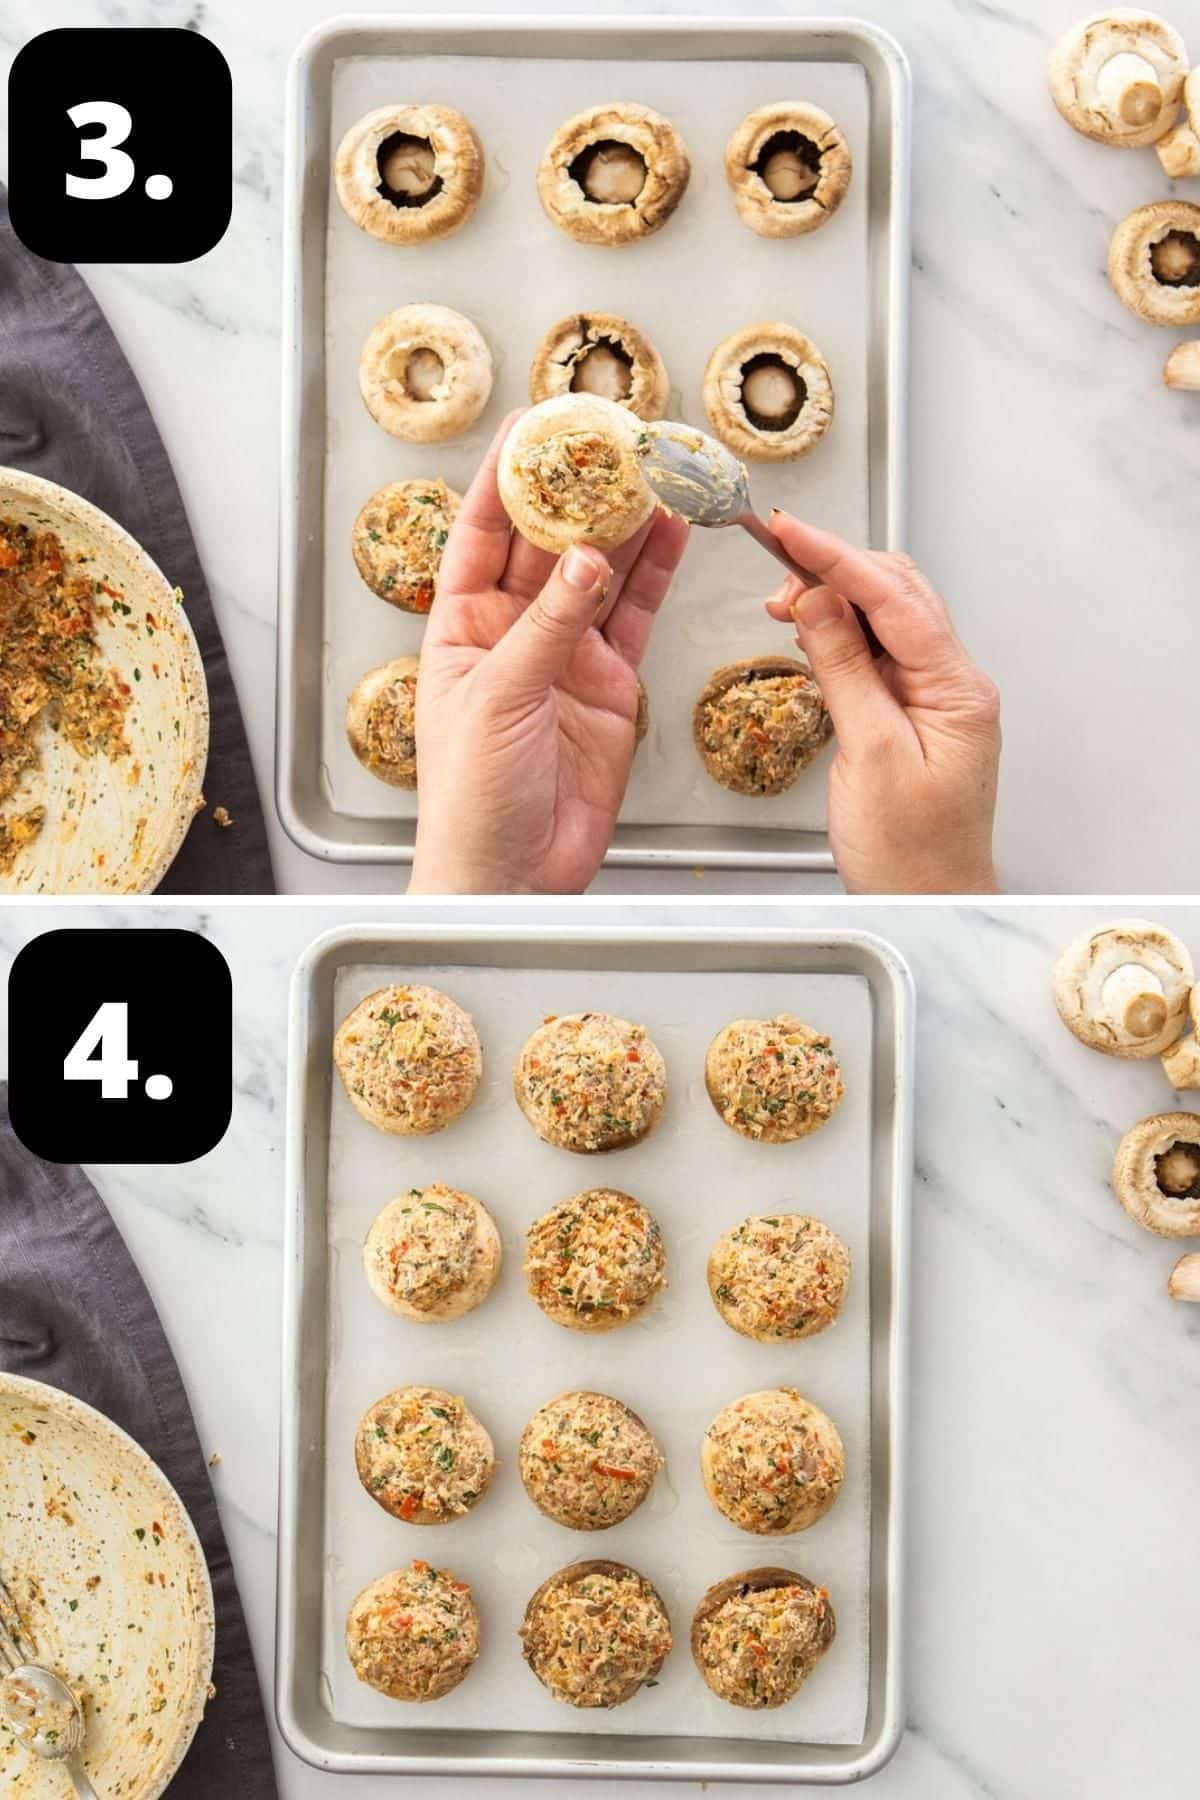 Steps 3-4 of preparing this recipe - adding the filling to the mushrooms and the mushrooms on a baking tray ready to bake.